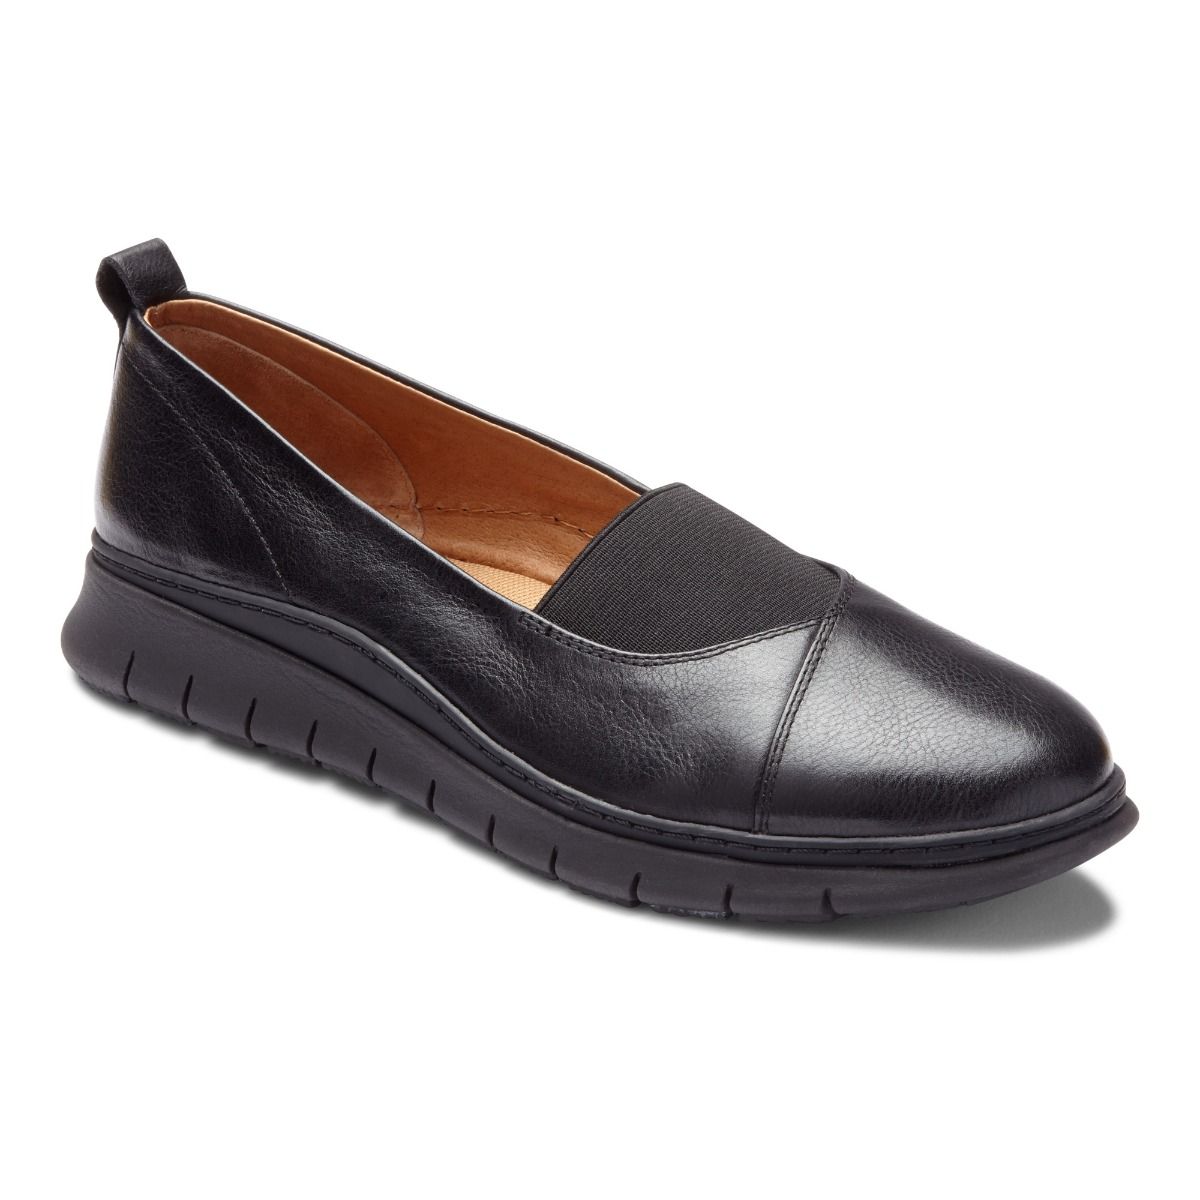 Linden Loafer - The Foot and Ankle Clinic